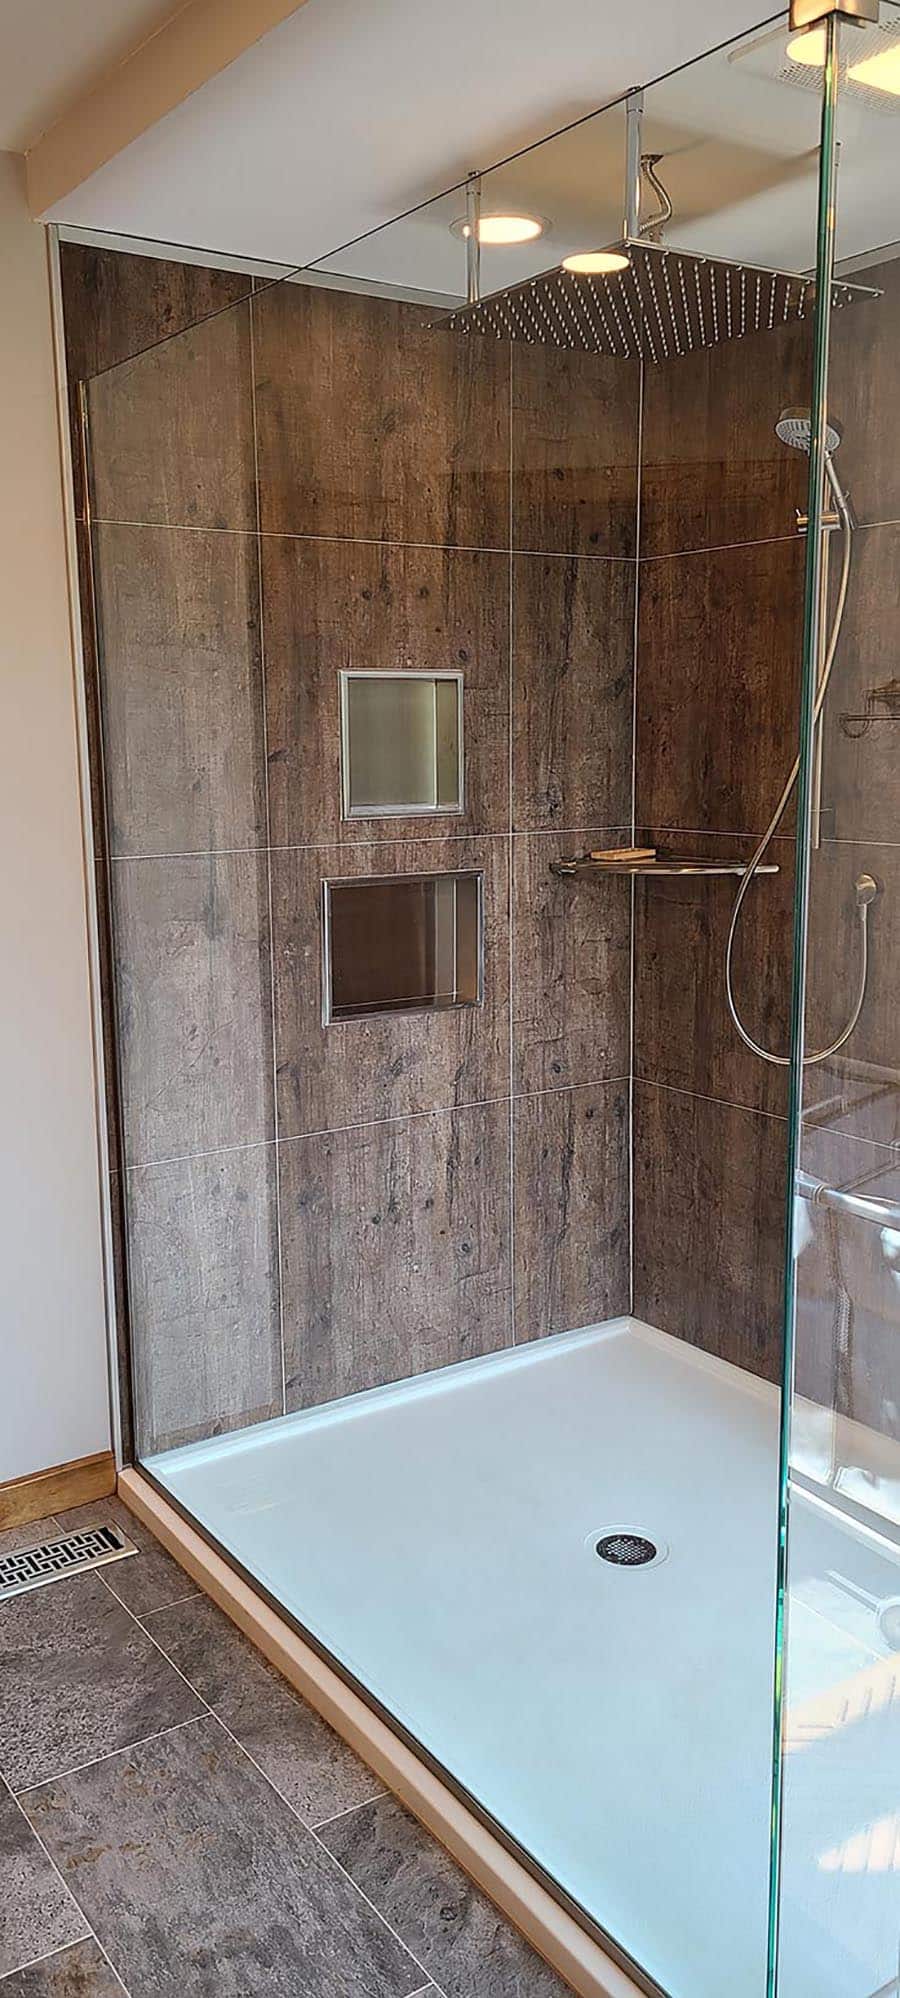 Reason 8 textured realistic shower panels Innovate Building Solutions | Innovate Building Solutions | Wall Panels easy to install | Bathroom Remodel | Shower design Ideas | Textured Walls